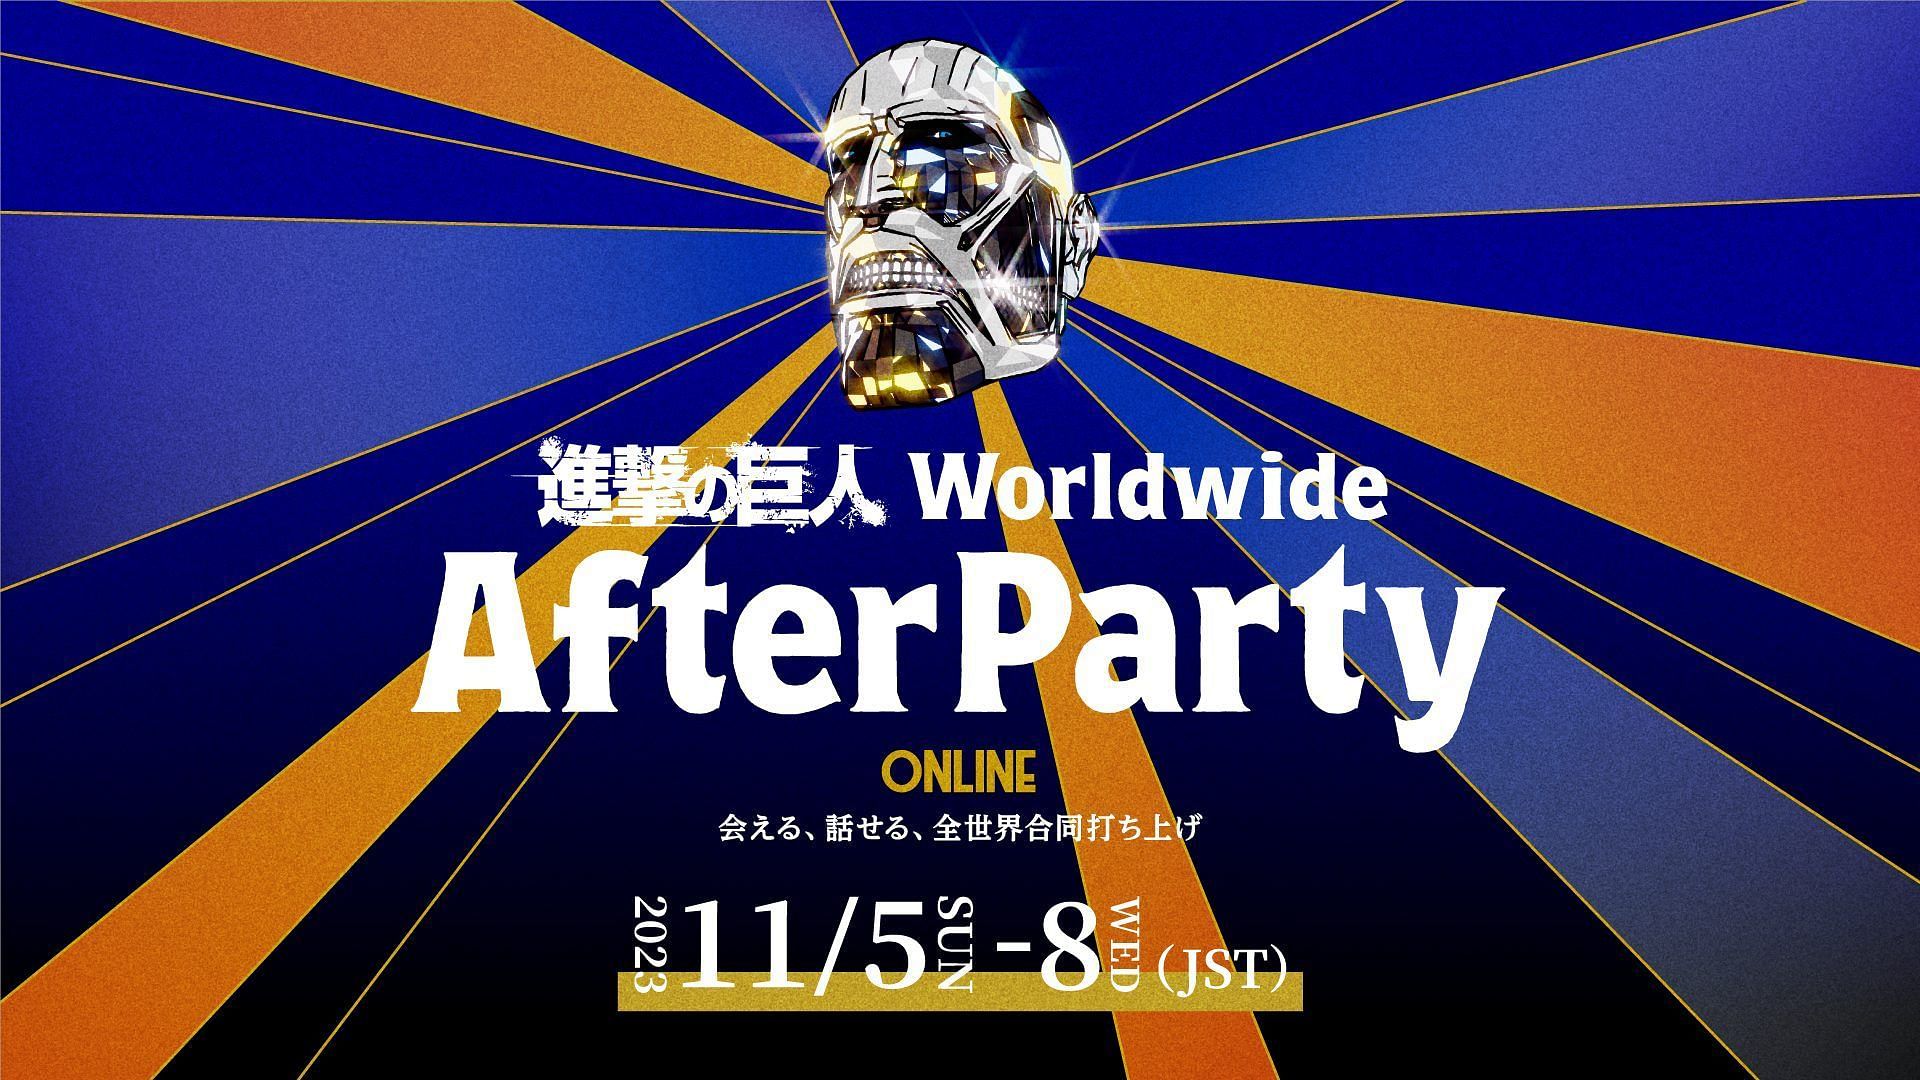 The Attack on Titan Online After Party is an Interesting